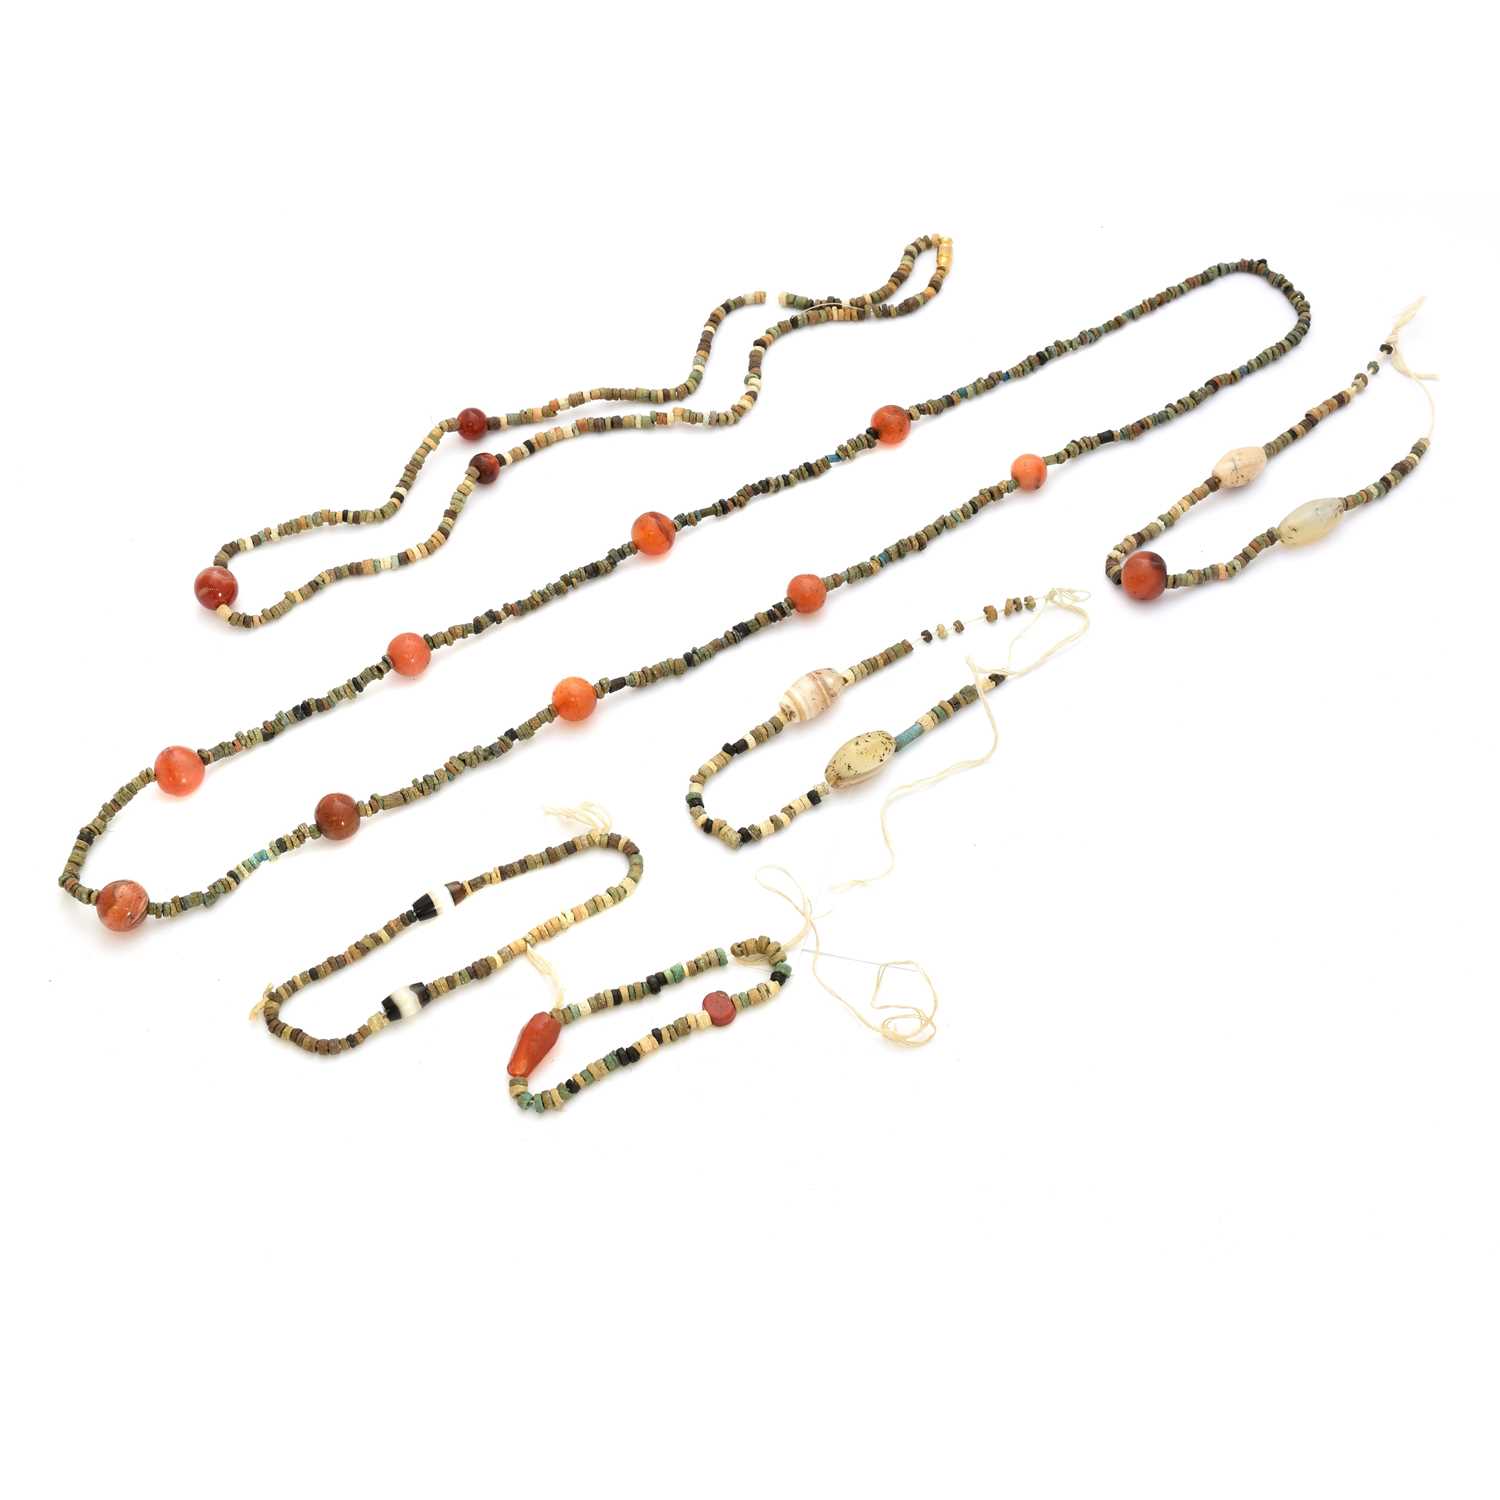 Lot 101 - A selection of Egyptian style mummy beads